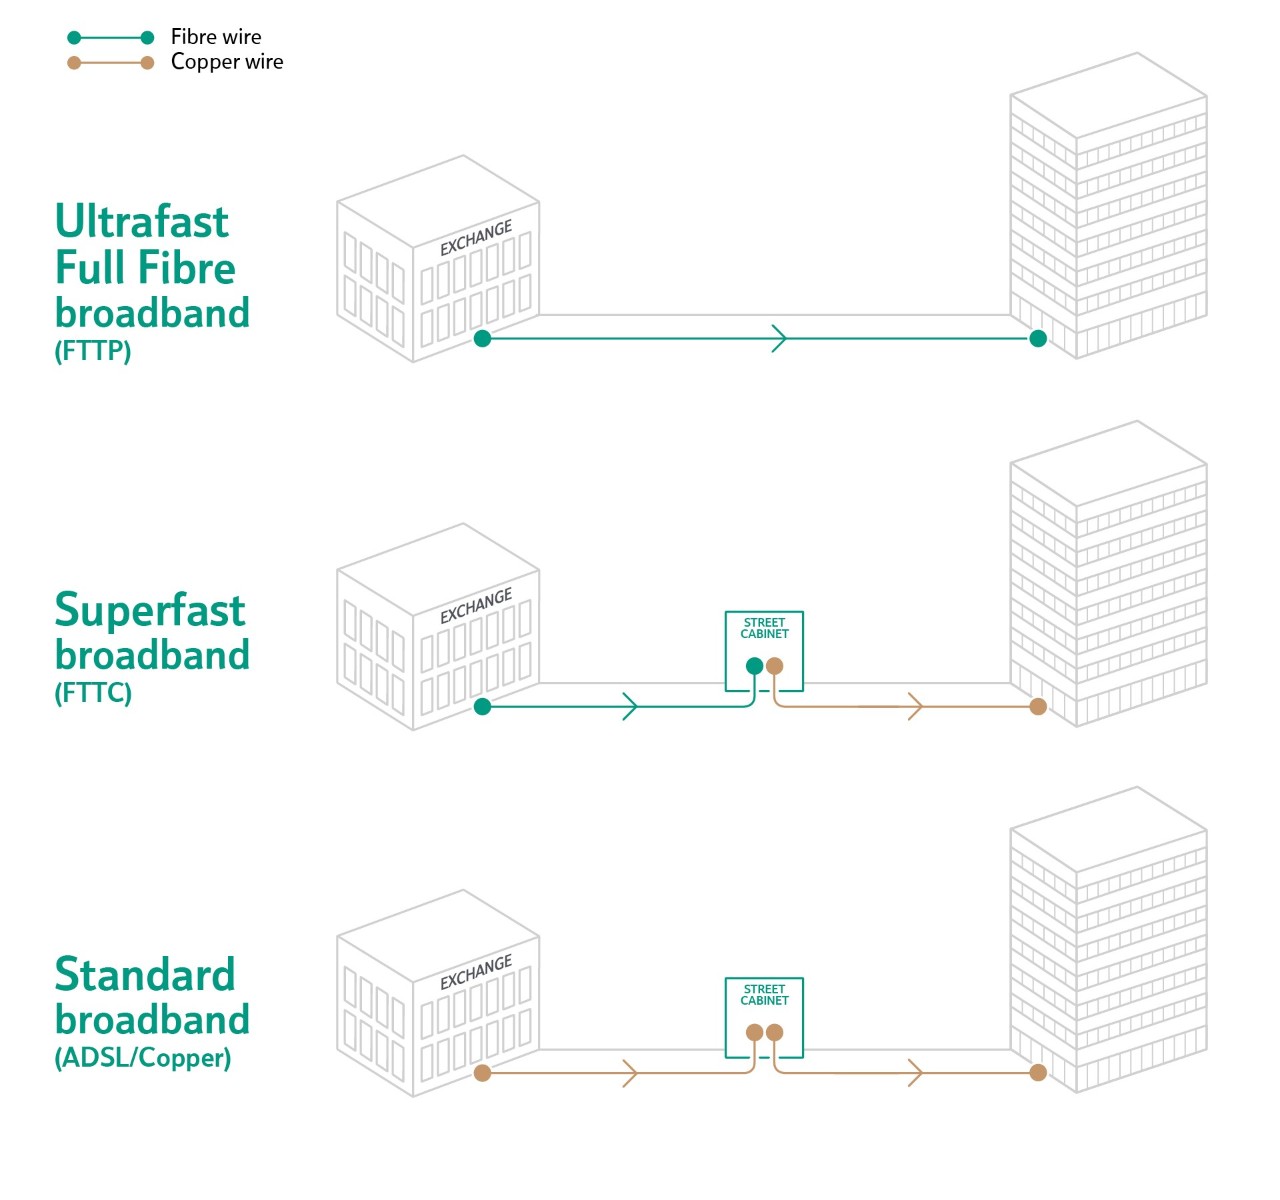 Illustration explaining the differences between FTTP, FTTC and Copper technology